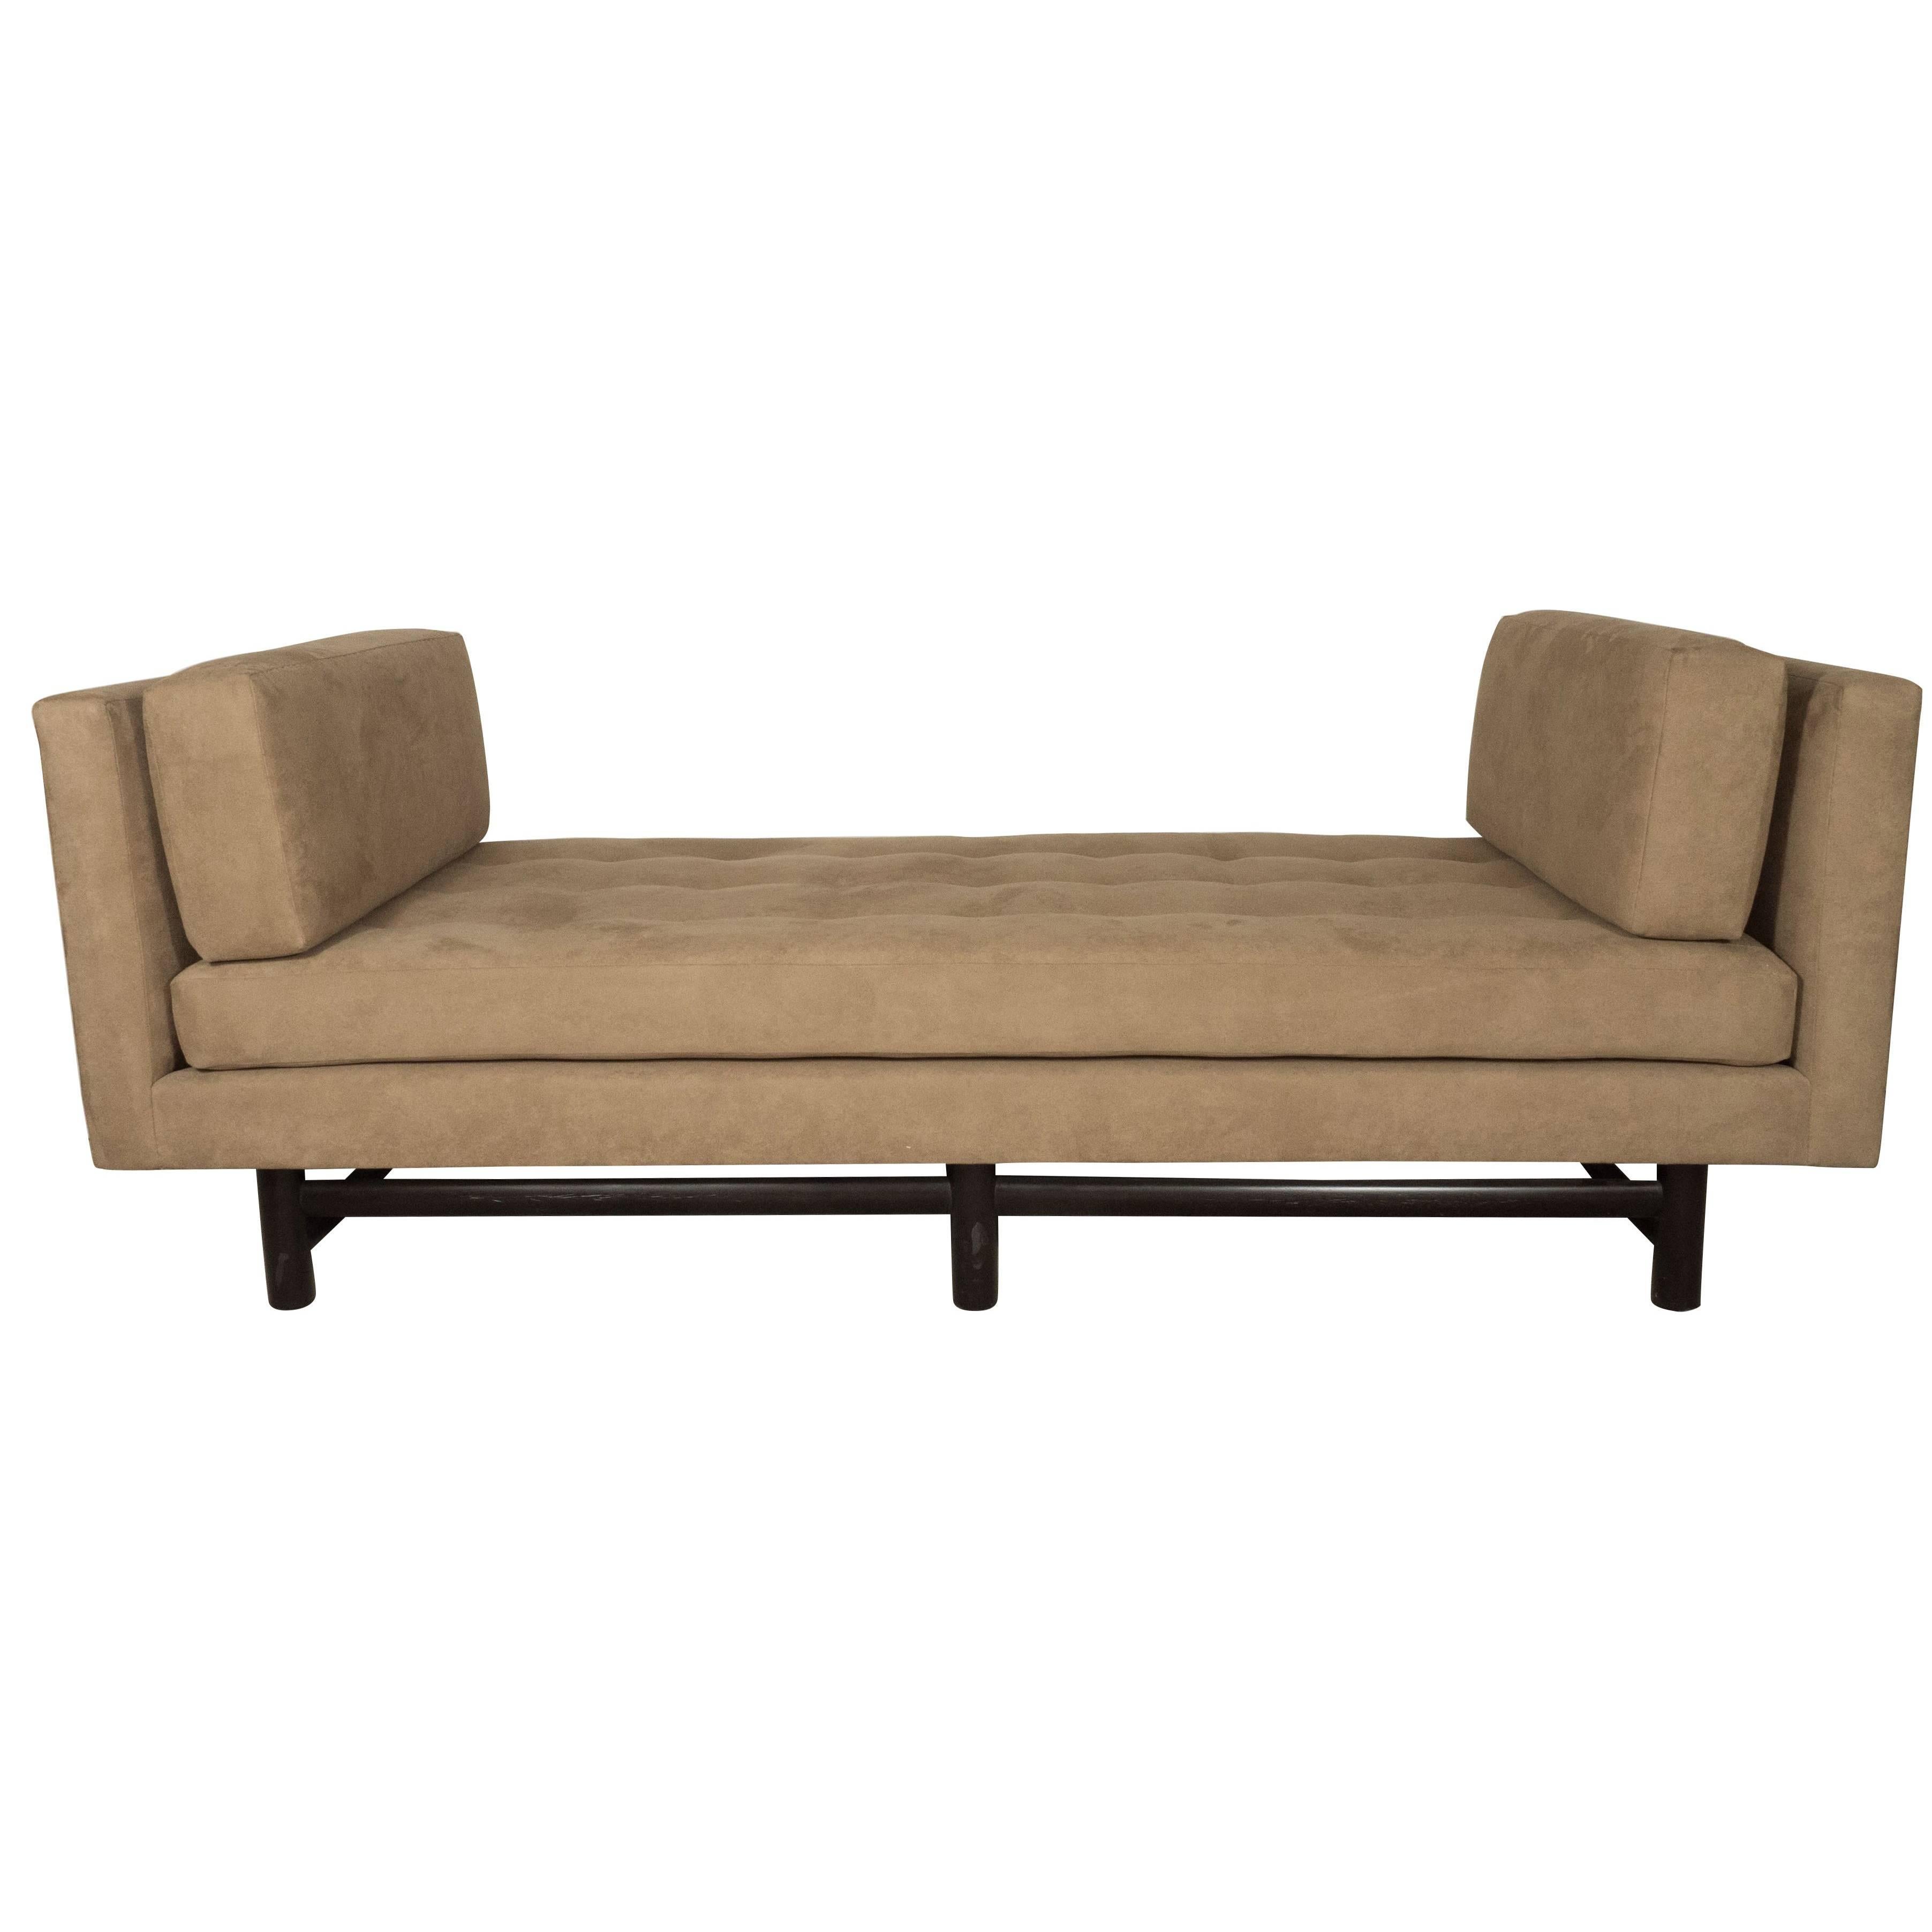 Ed Wormley for Dunbar Rectangular Upholstered Daybed, 1950s For Sale